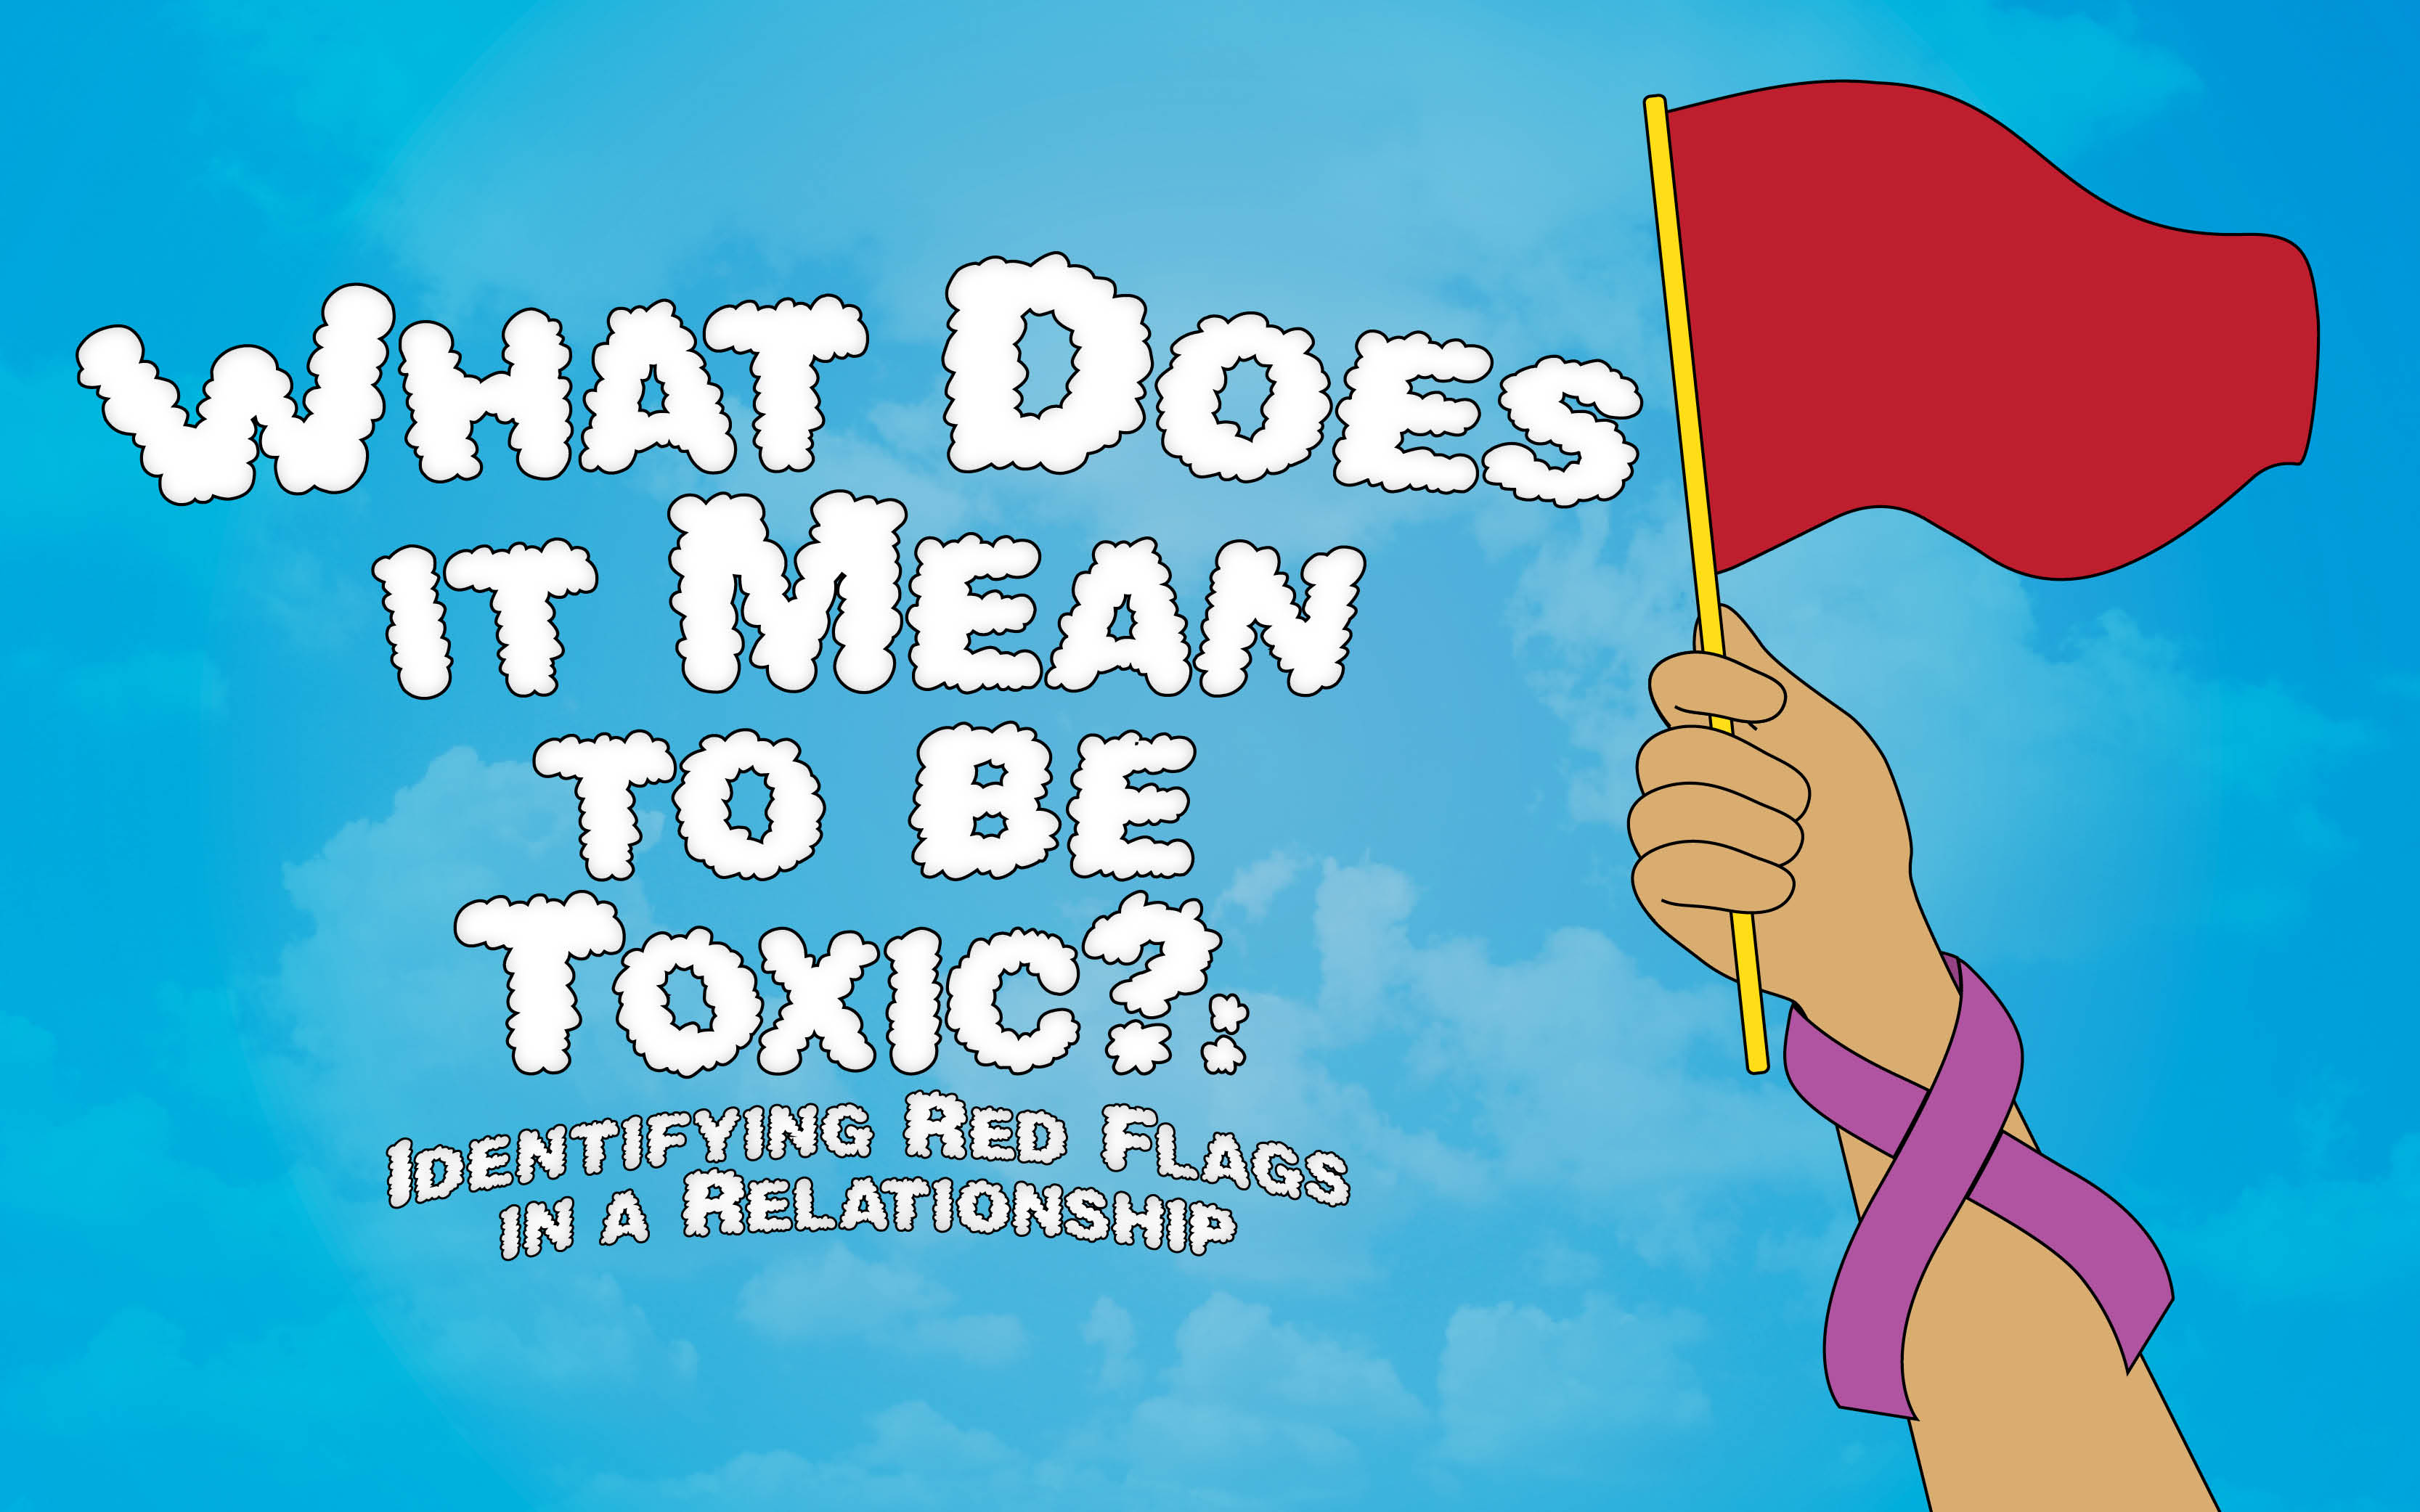 hat Does It Mean to Be Toxic? Identifying Red Flags in a Relationship